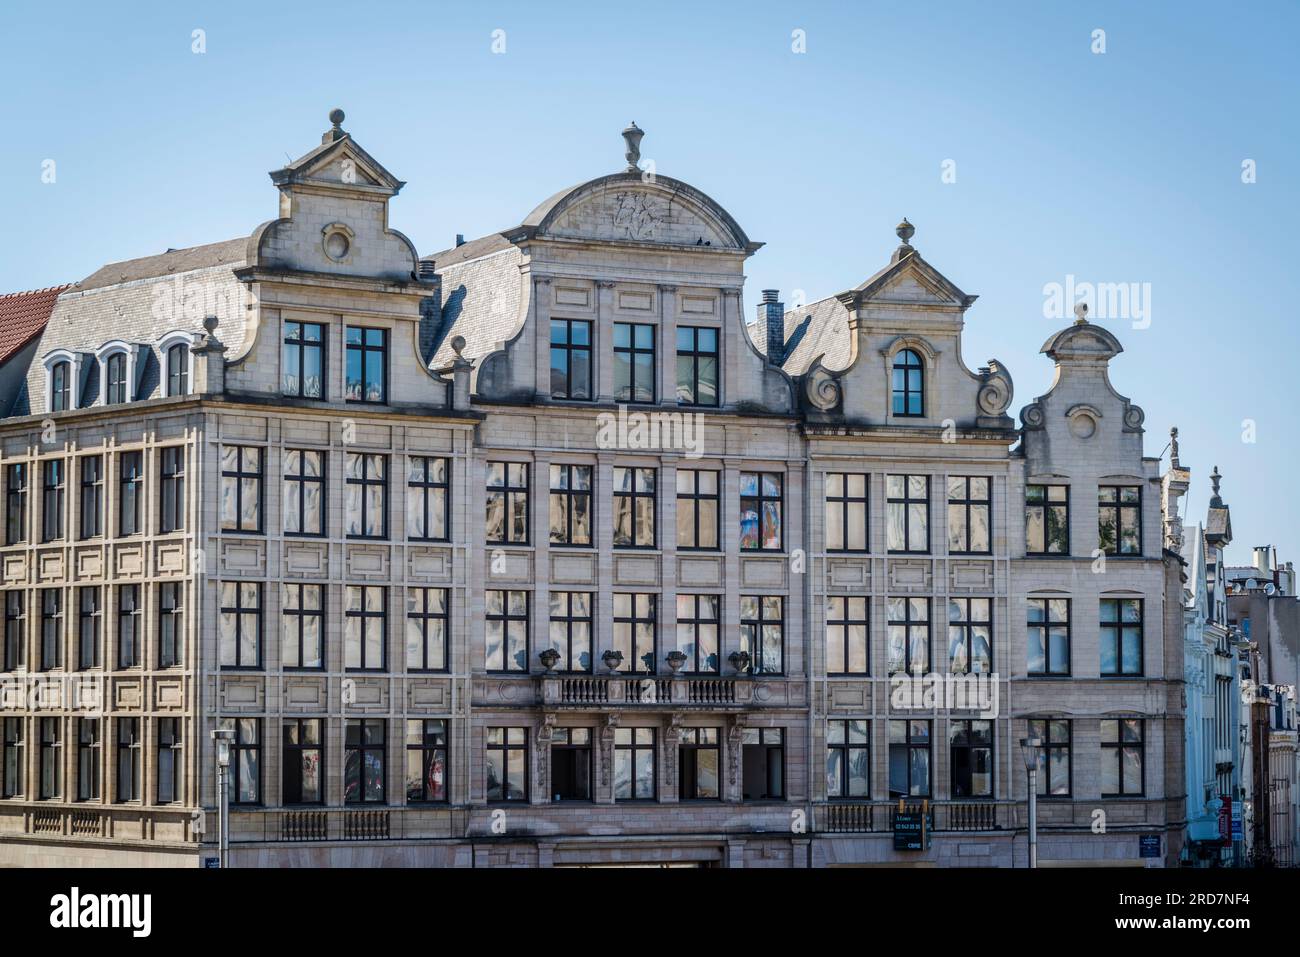 Row of Baroque style buildings with typical  Flemish gables, Place De L'albertine, Brussels, Belgium Stock Photo